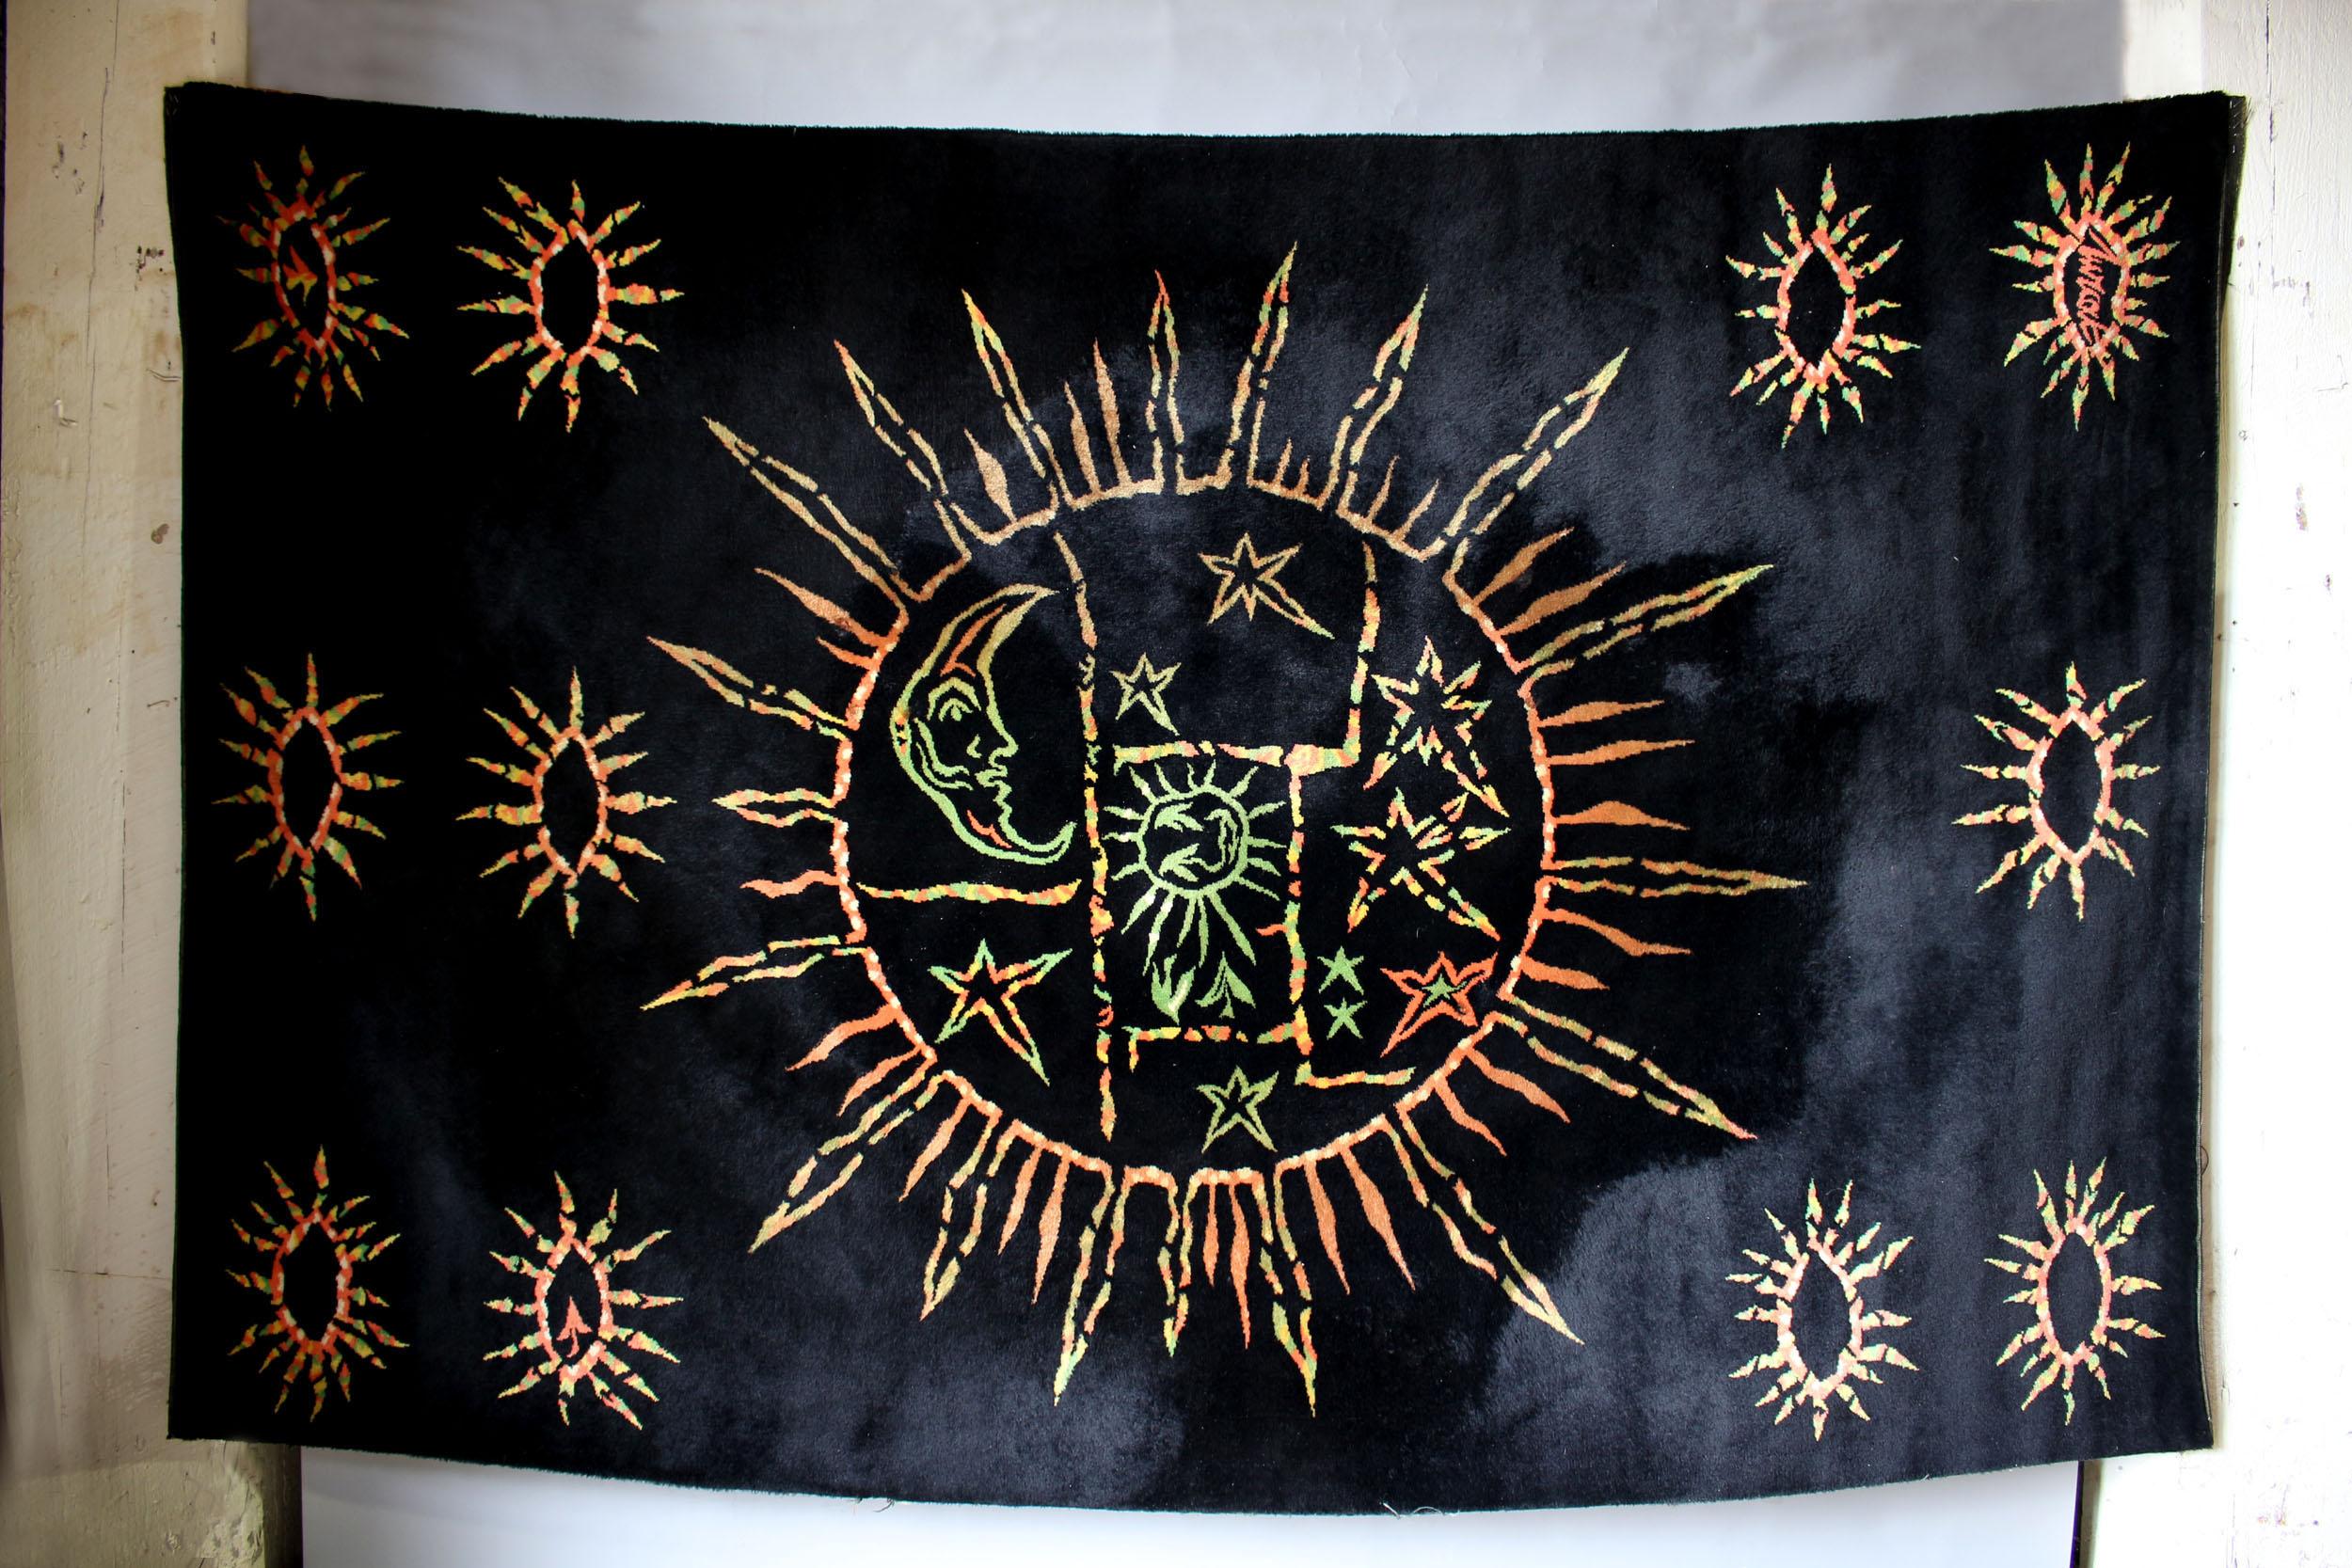 A fine French 1950s rectangular black background wool rug with colorful sun, moon and stars motifs by Jean Lurcat.
Signed.